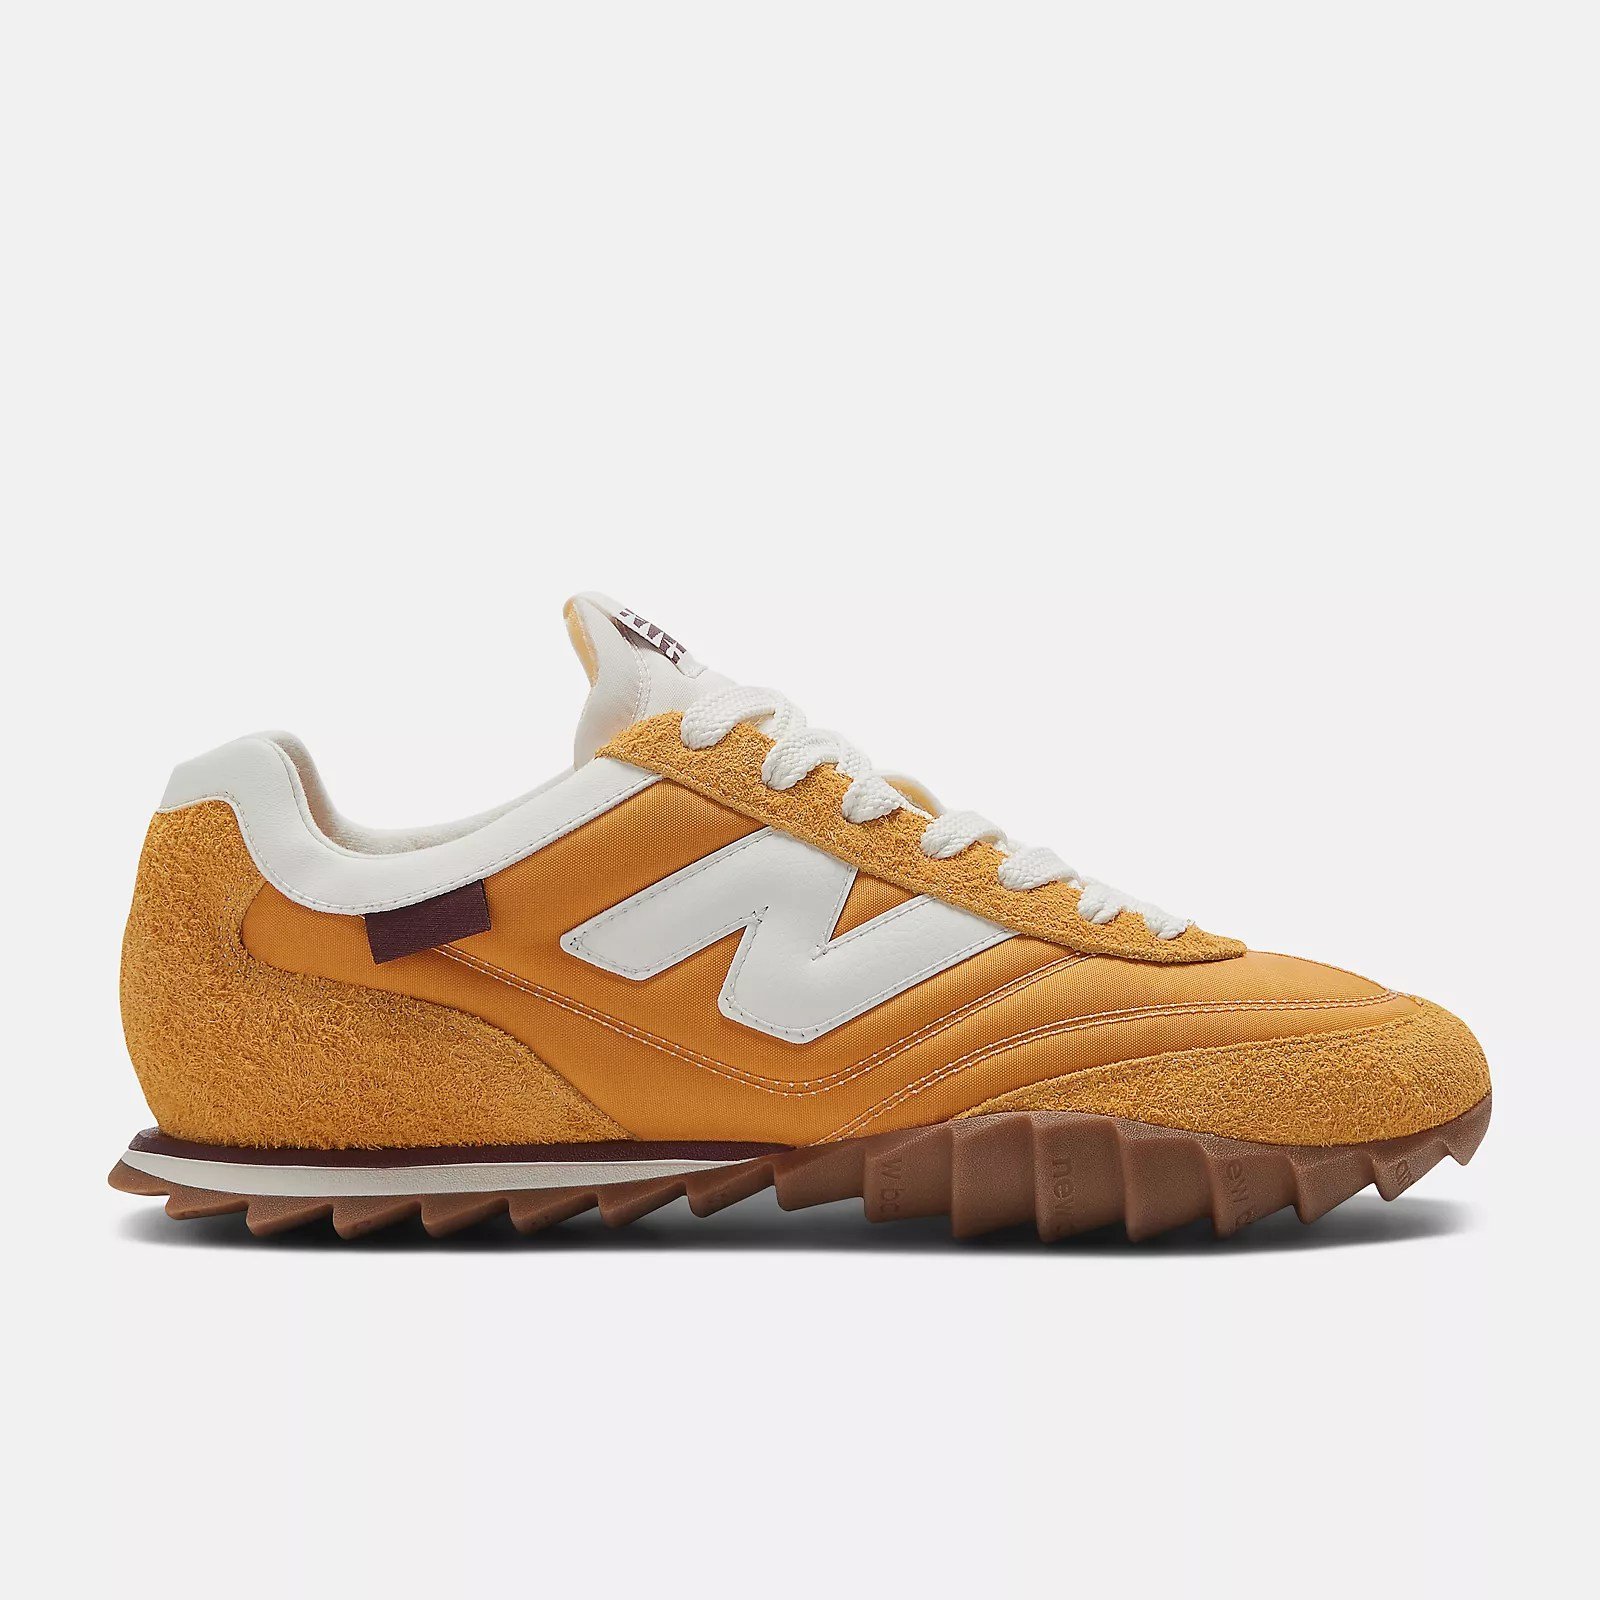 Retro New Balance Shoes Designed by Singer and Actor Donald Glover